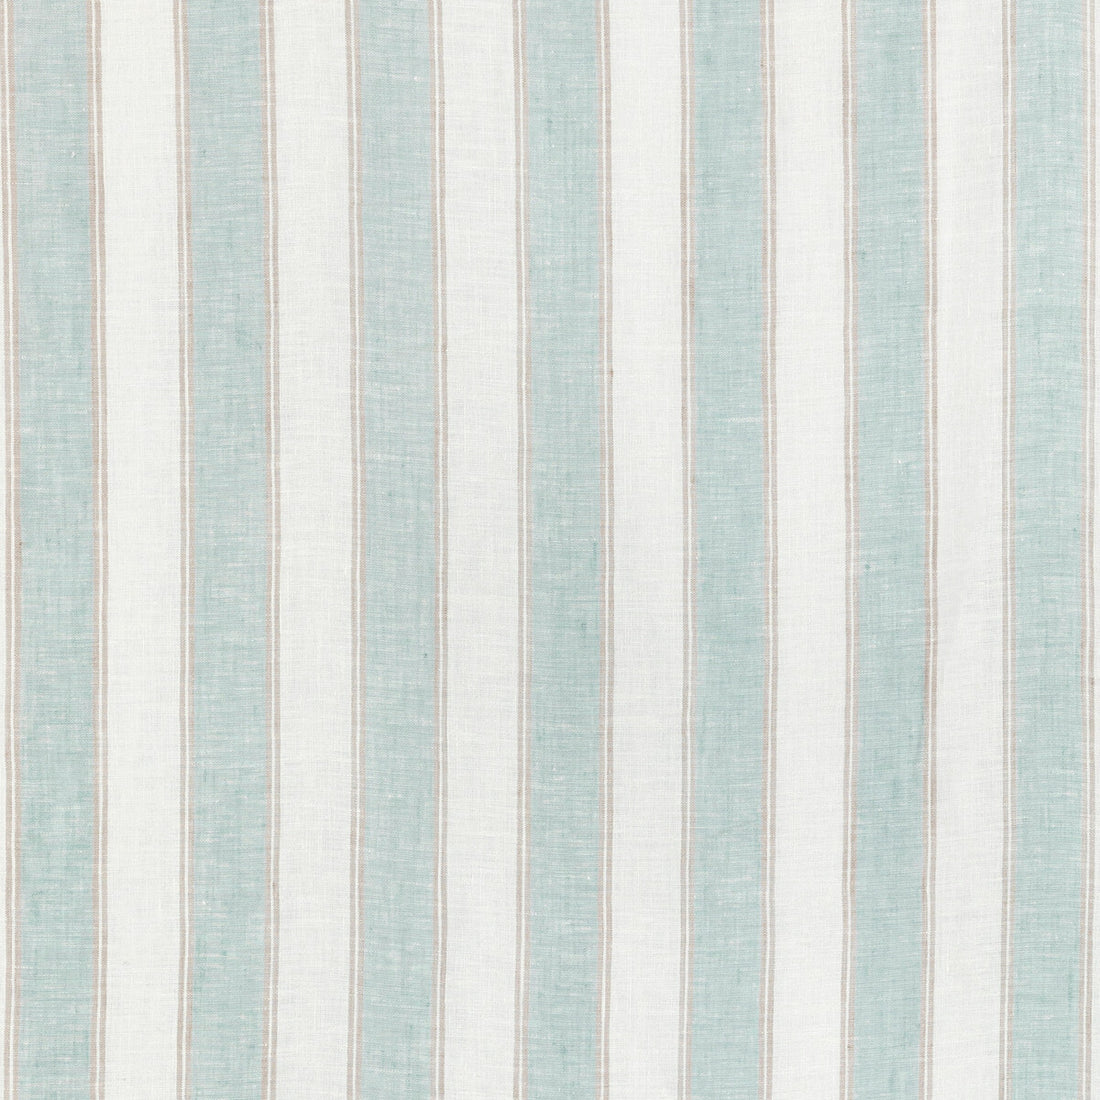 Humphrey Sheer fabric in lagoon color - pattern 2021118.13.0 - by Lee Jofa in the Summerland collection